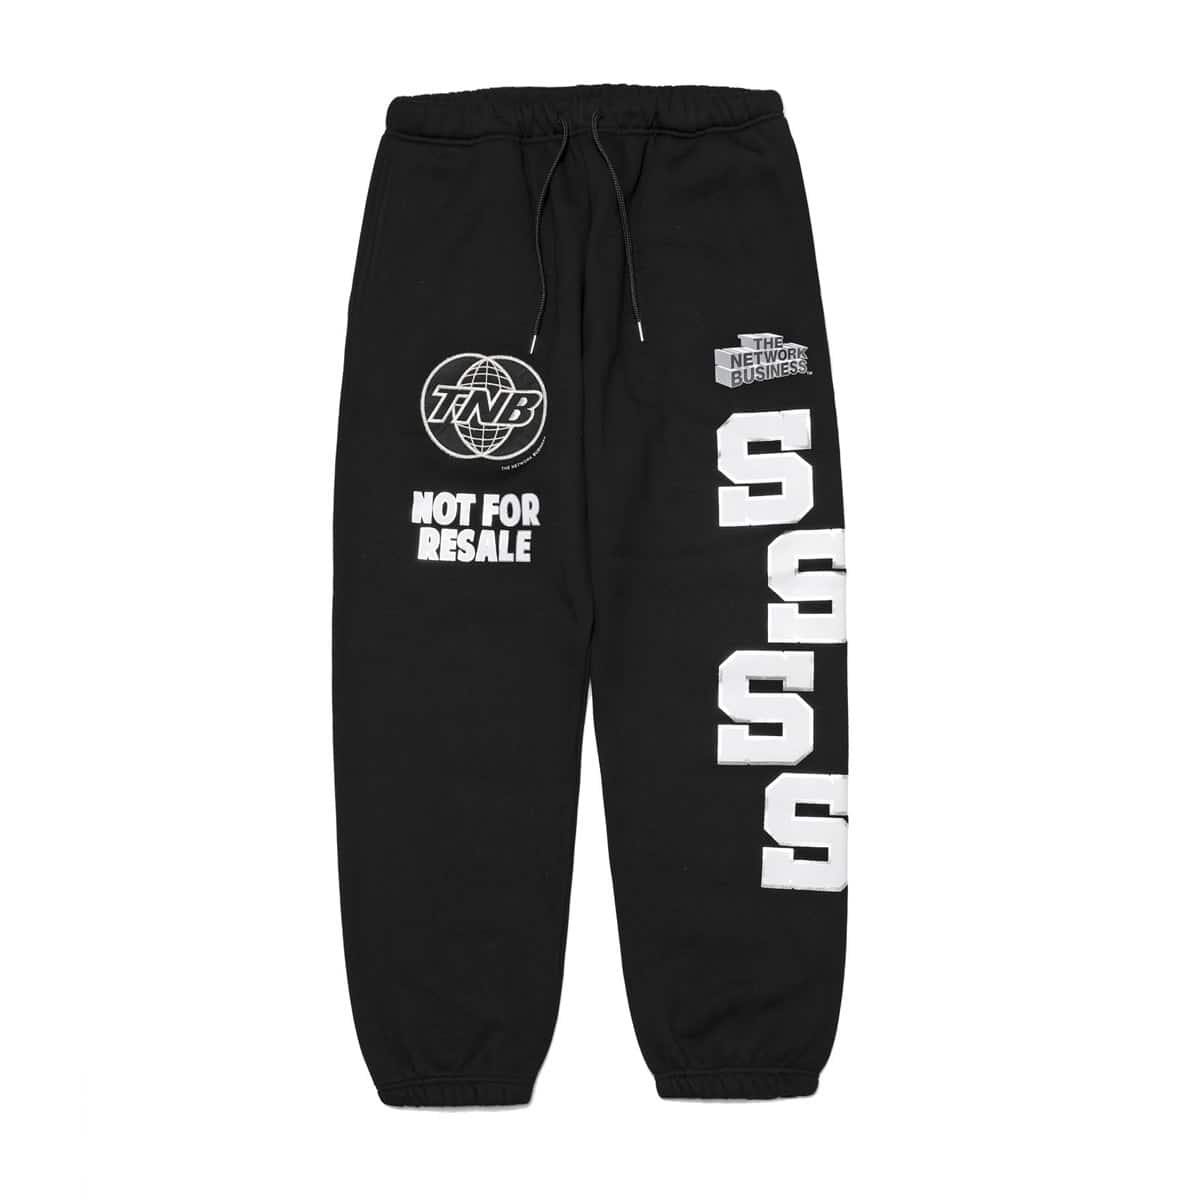 THE NETWORK BUSINESS Sweat Pants Silver Toe BLACK 21SP-S_photo_large